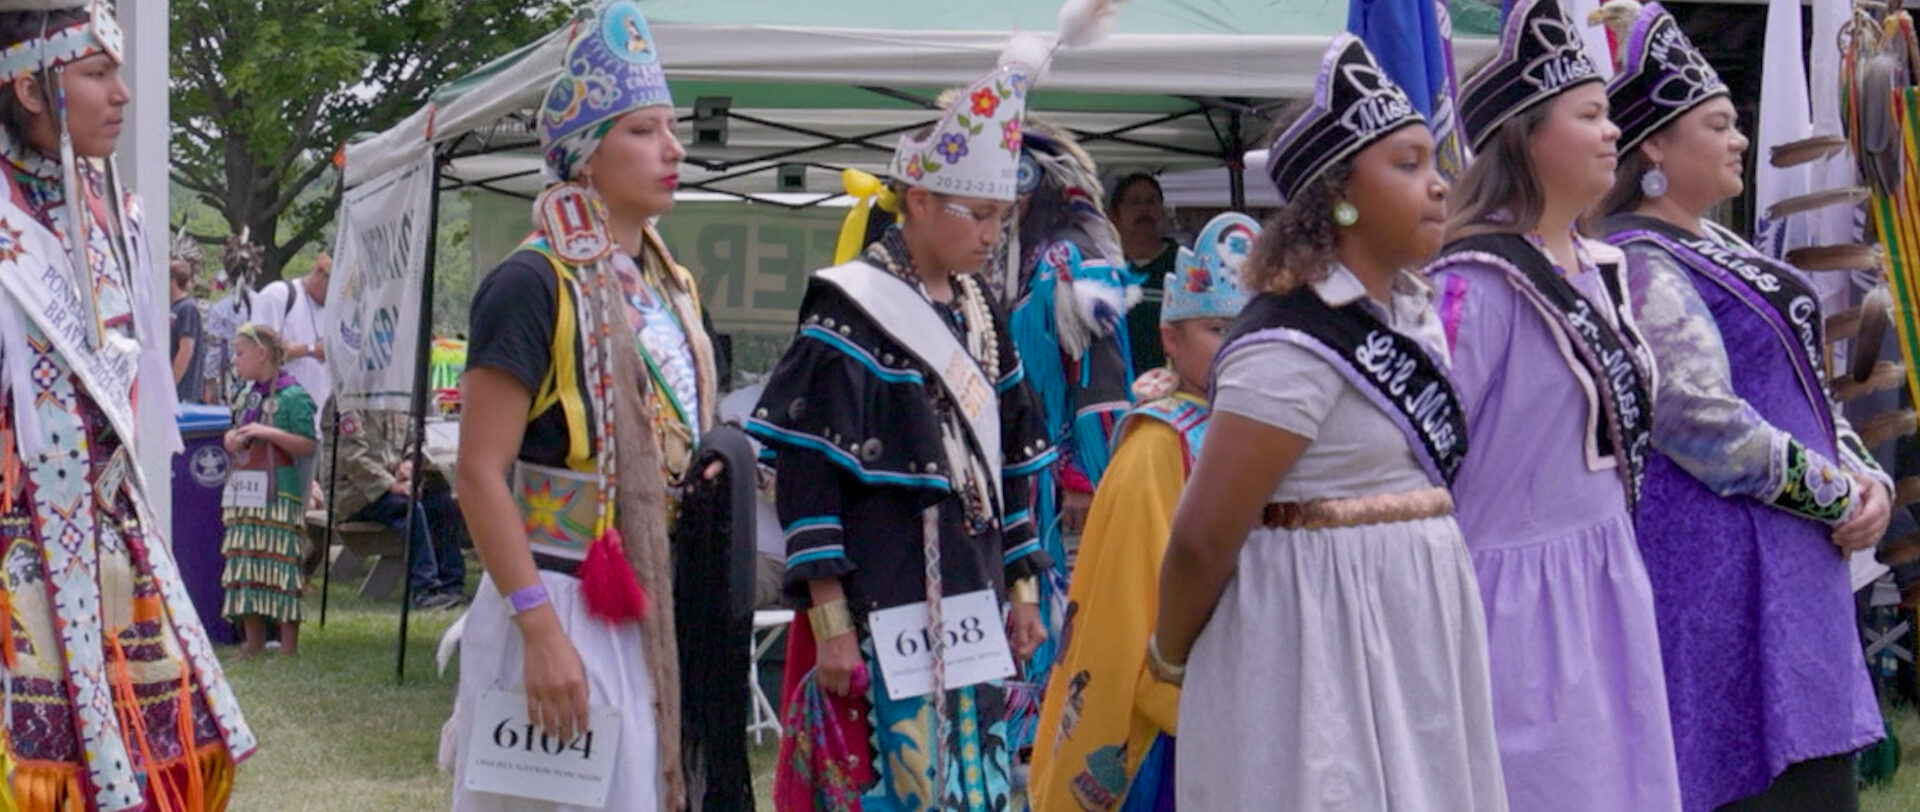 A group of young people wearing traditional Native American regalia as well as pageant style sashes. Some of them have paper with competition numbers pinned to their skirts.